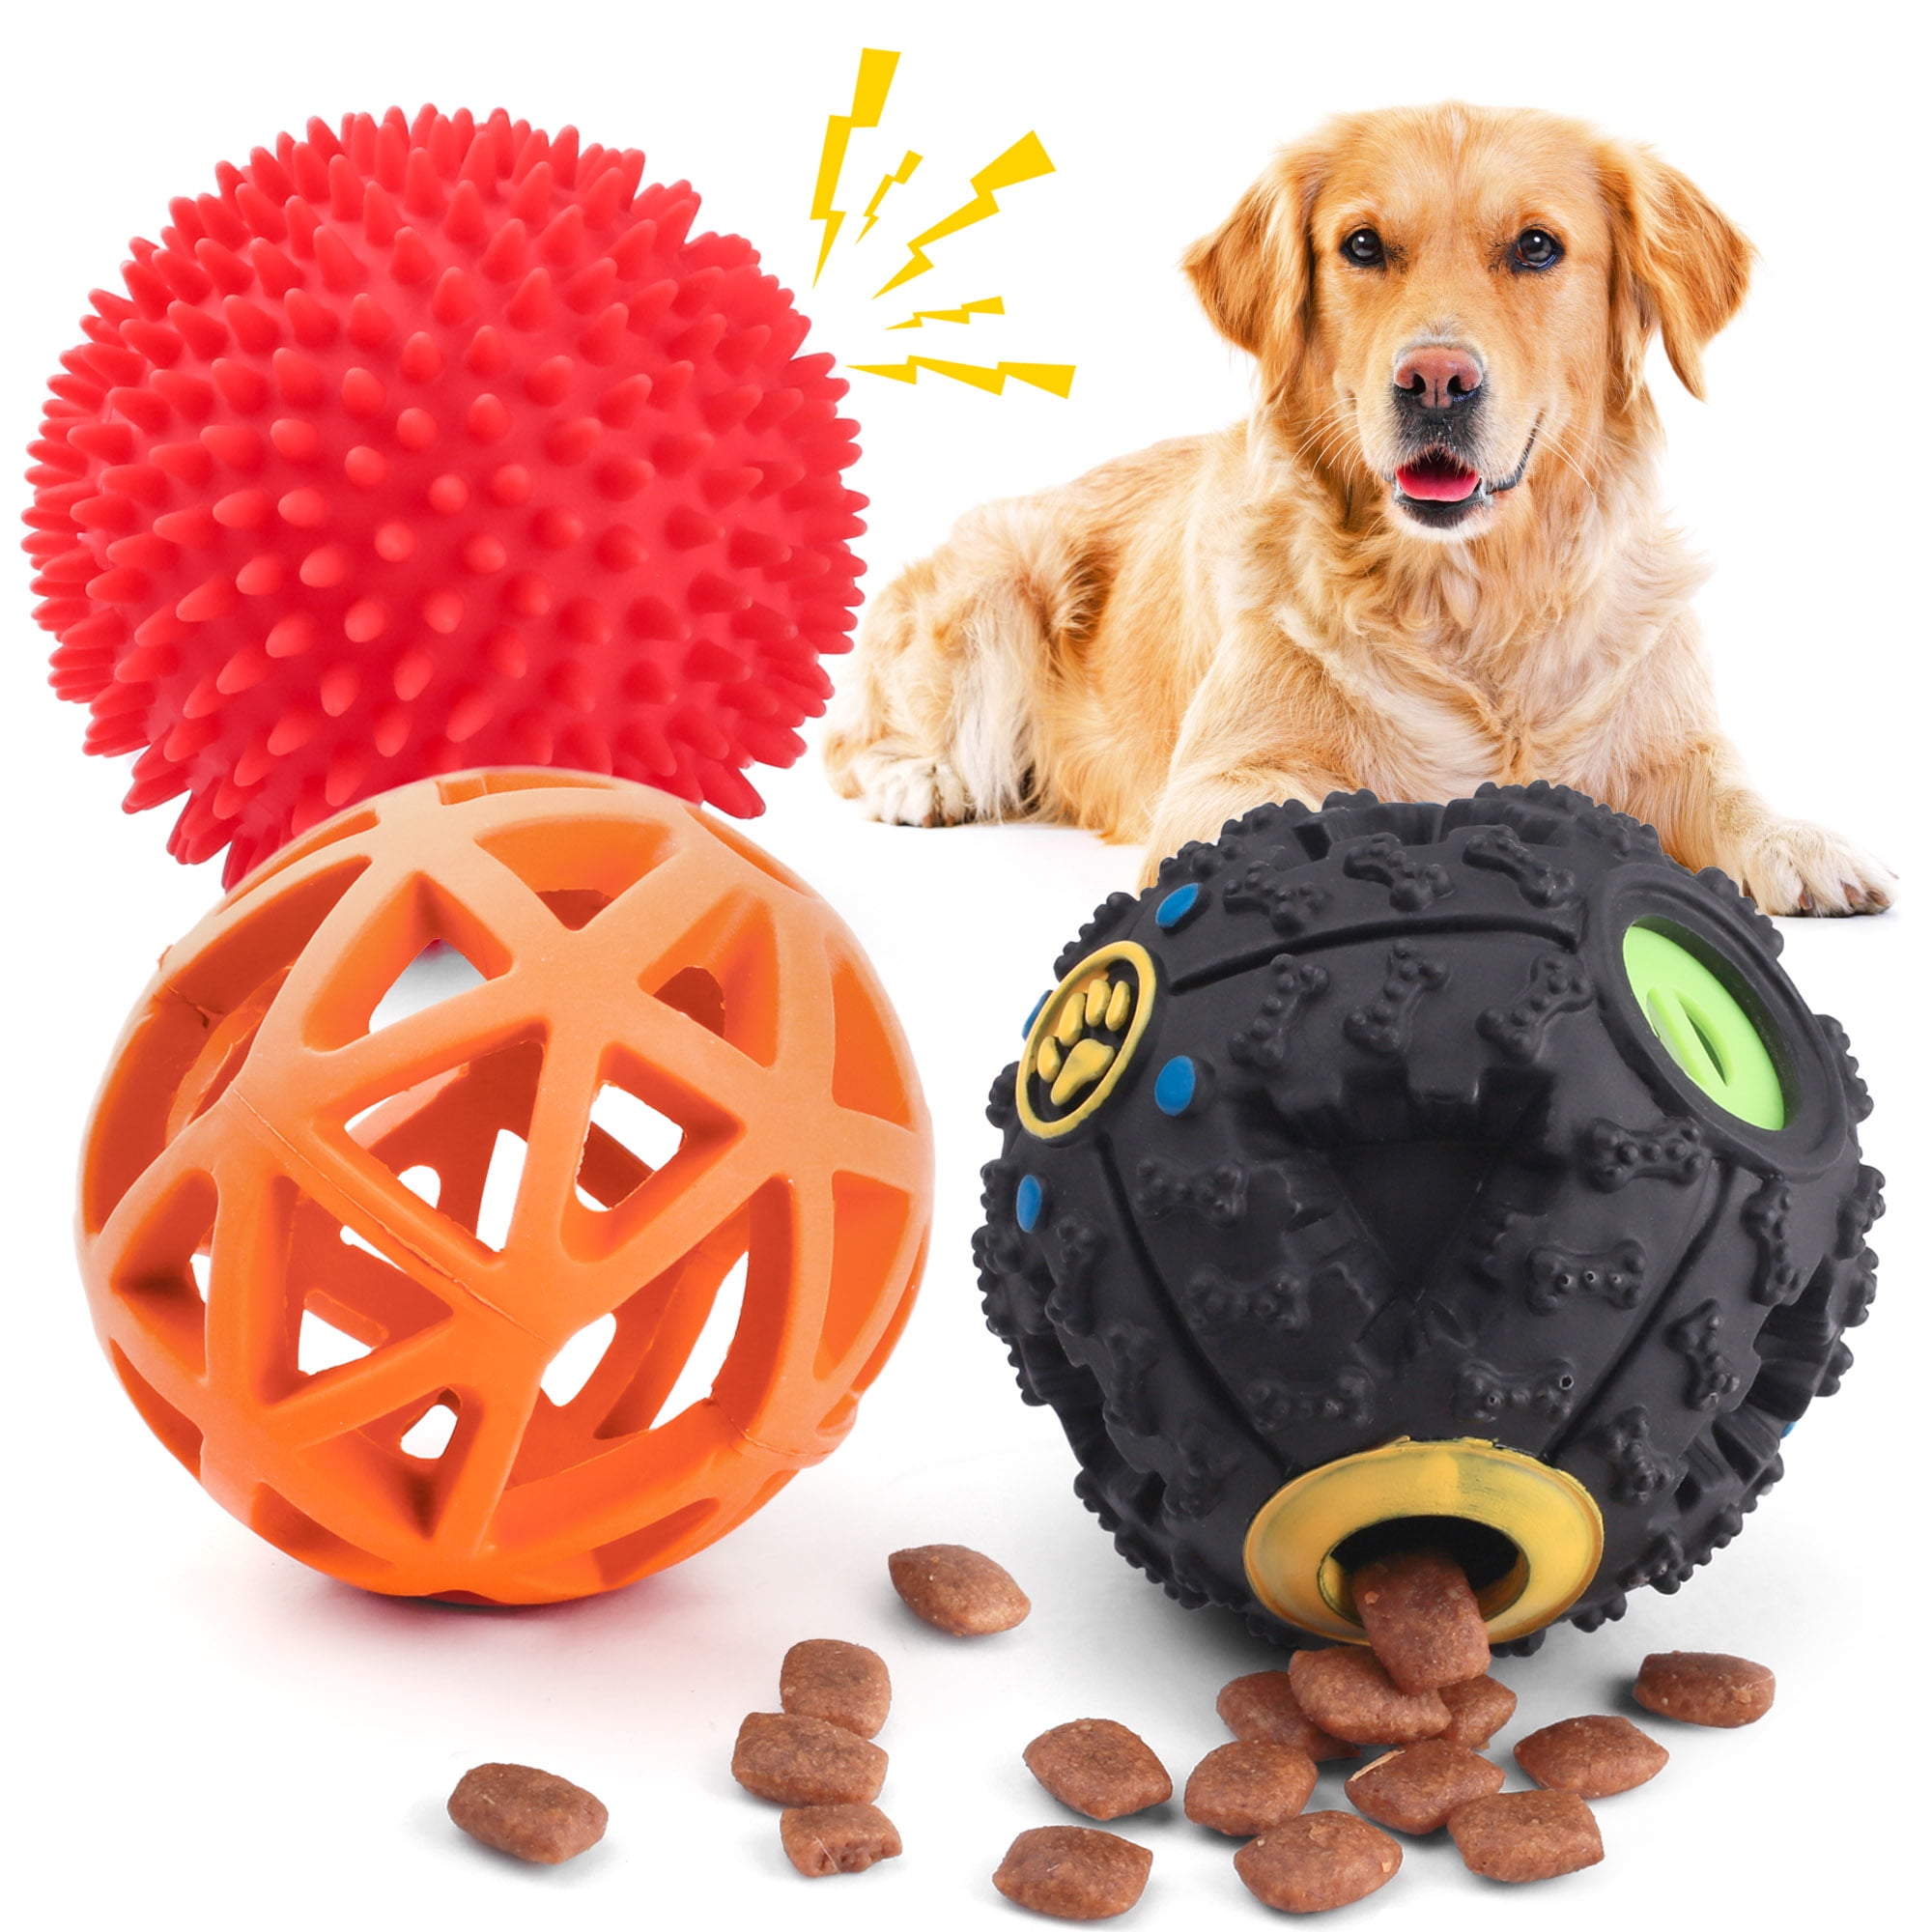 Primepets 3pack Dog Treat Ball Interactive Food Dispensing Dog Toys